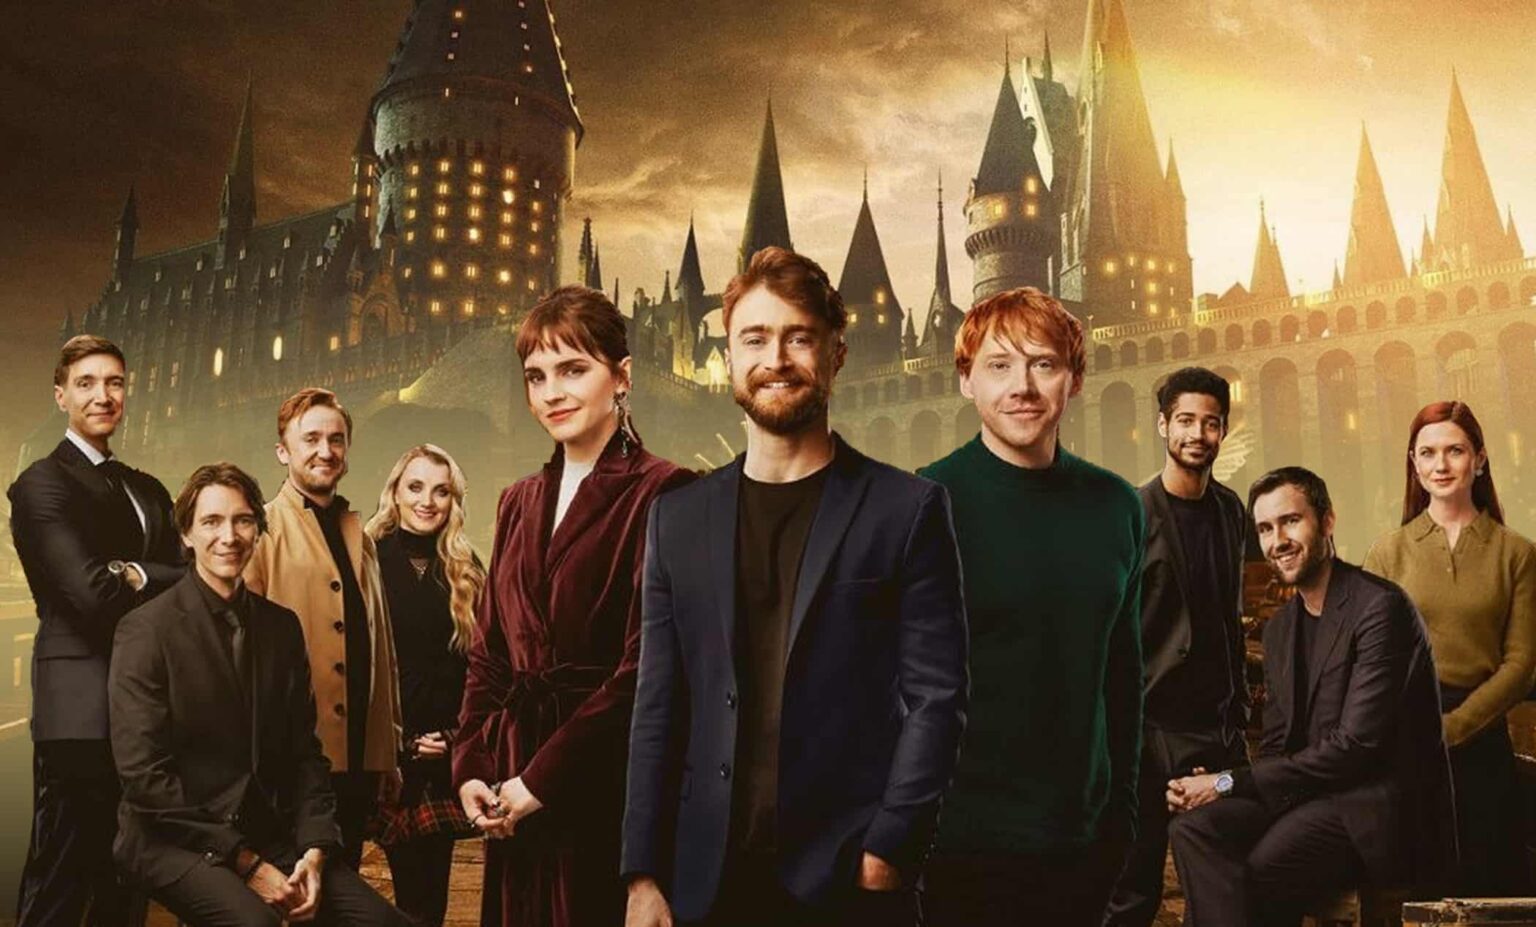 Watch all of your favorite wizards and witches reunite in 'Harry Potter 20th Anniversary: Return to Hogwarts'! Find out here how to watch the new special.